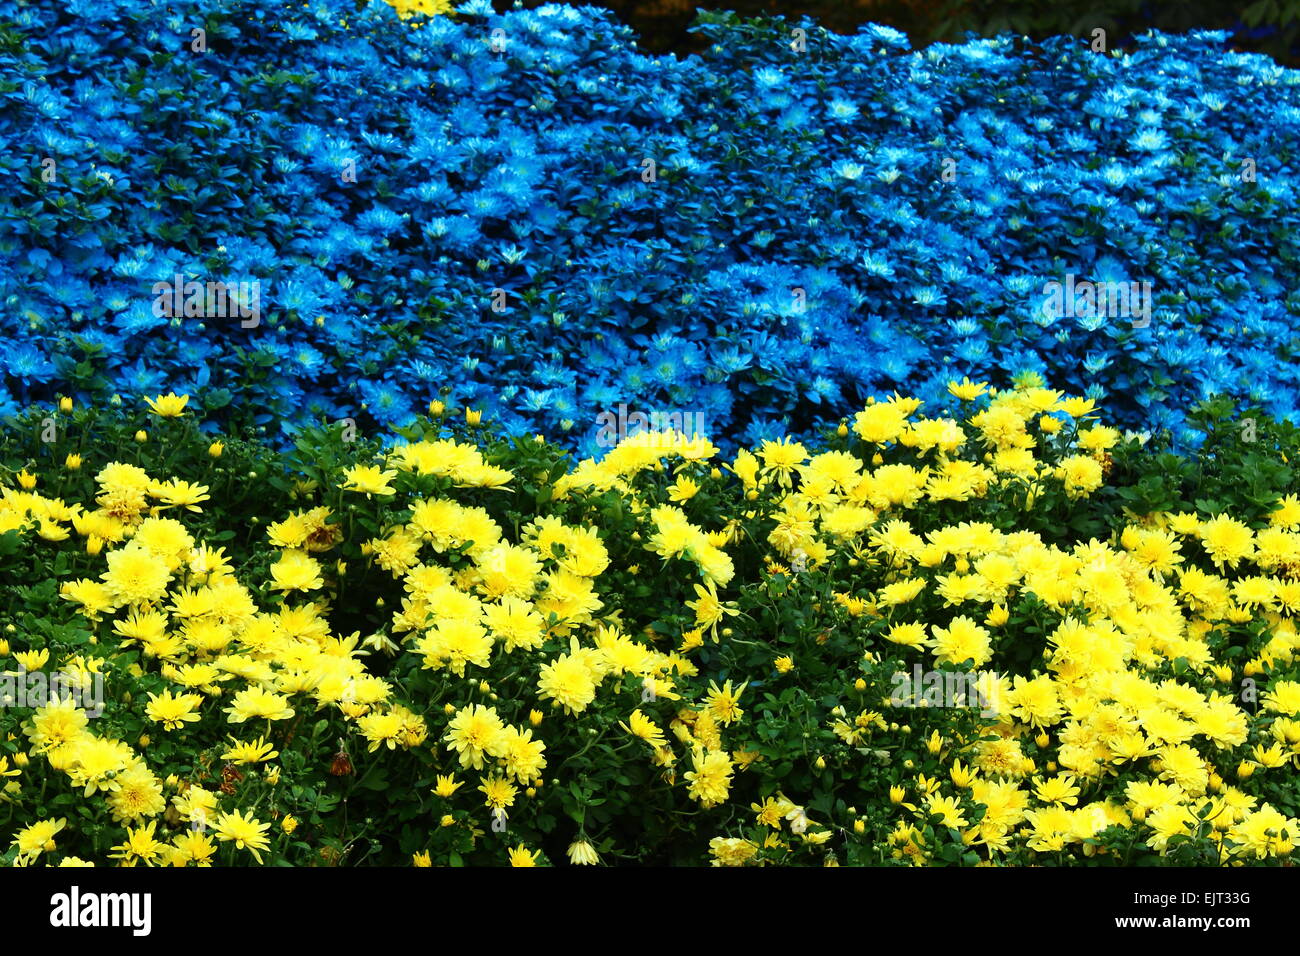 lots of flowers chrysanthemum yellow and blue Stock Photo